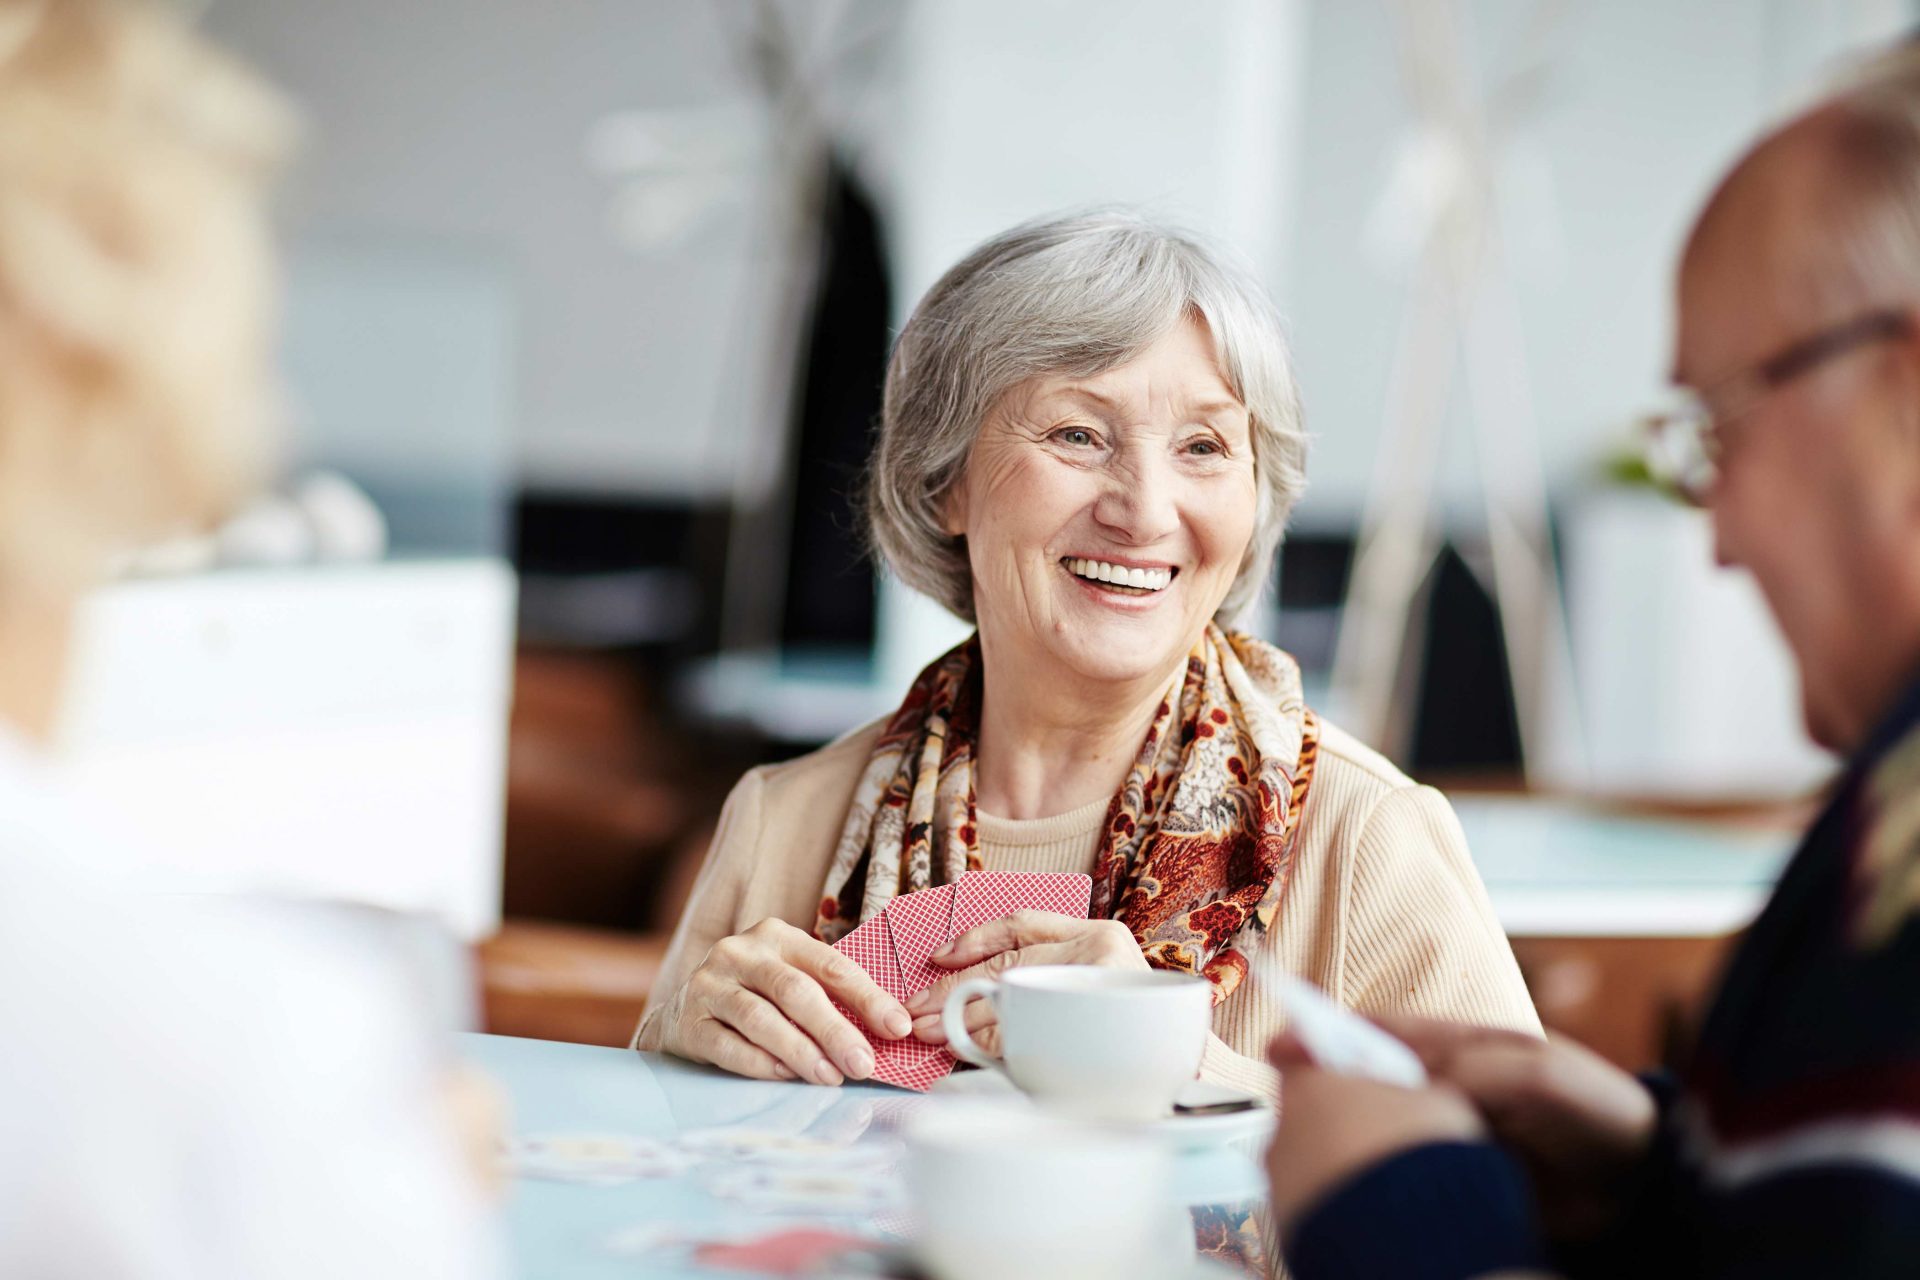 Elderly woman smiling and playing cards with friends, while enjoying a cup of coffee.